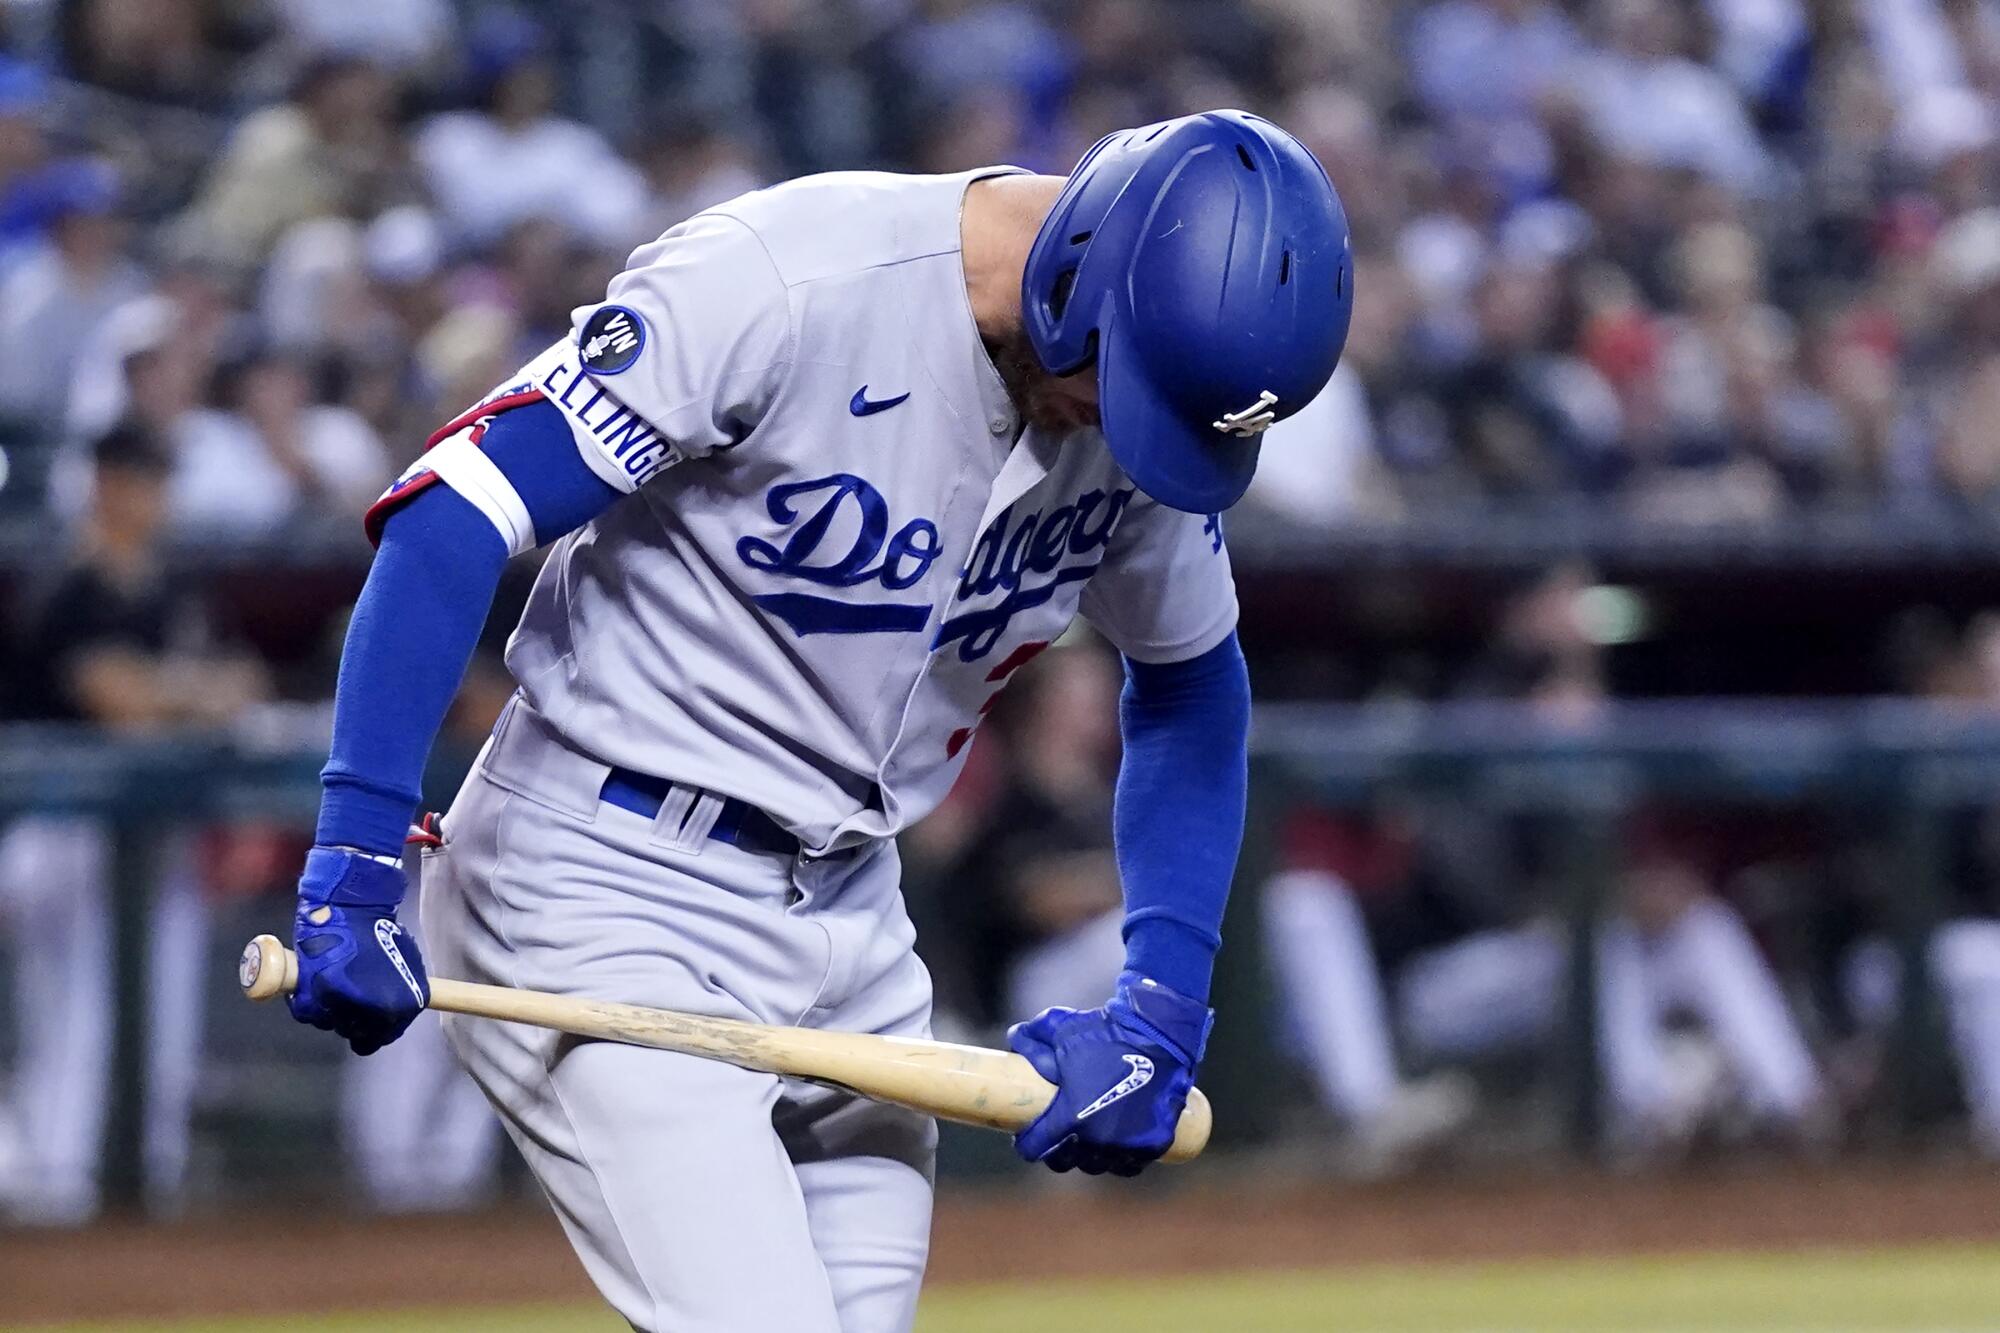 The Dodgers' Cody Bellinger tries to break his bat as he flies out during the fourth inning against the Diamondbacks